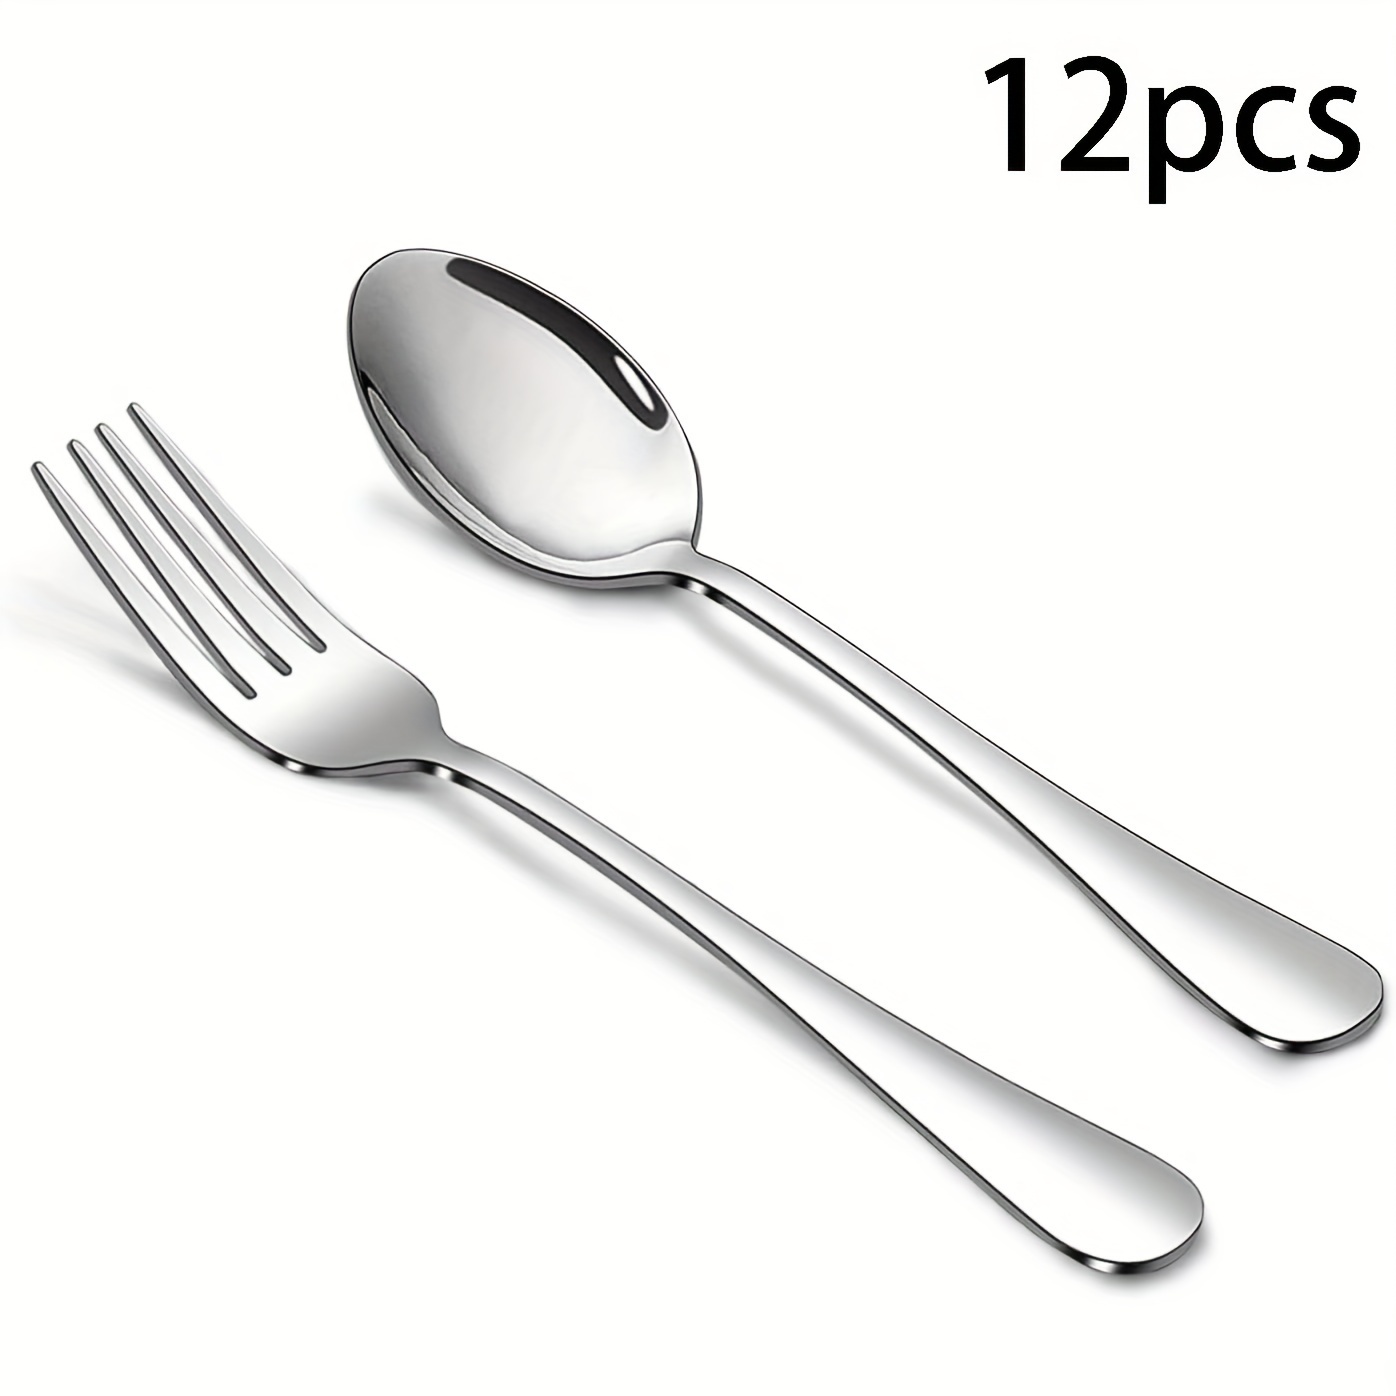 

Elegant 12-piece Stainless Steel Cutlery Set - Includes Forks & Spoons, Dishwasher Safe, Perfect For Home & Restaurant Use Stainless Steel Cookware Porcelain Dinnerware Set